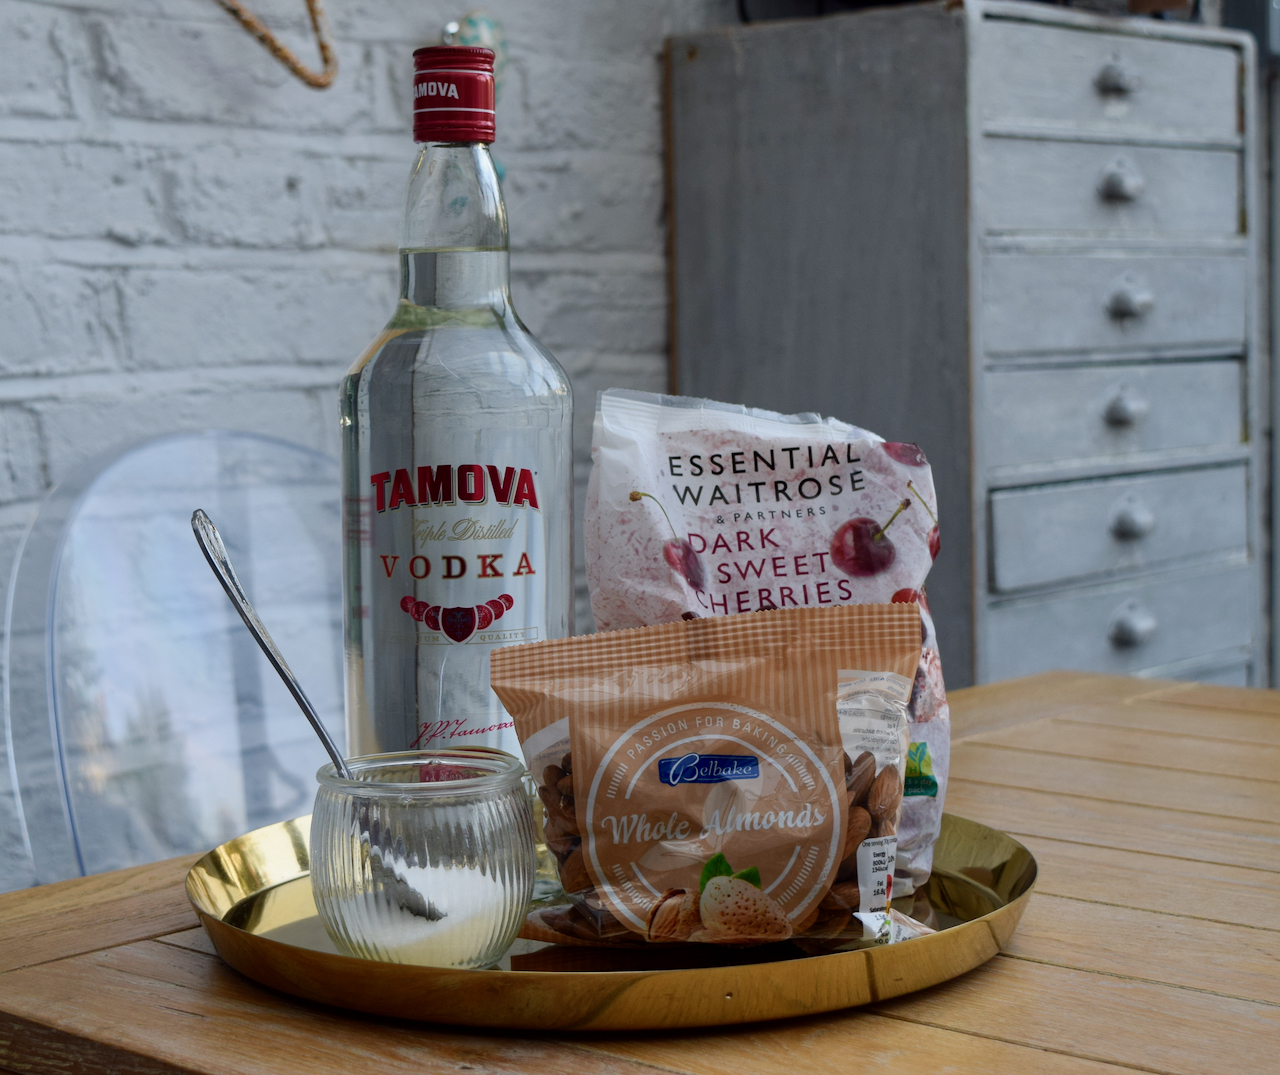 Cherry Bakewell Vodka recipe from Lucy Loves Food Blog